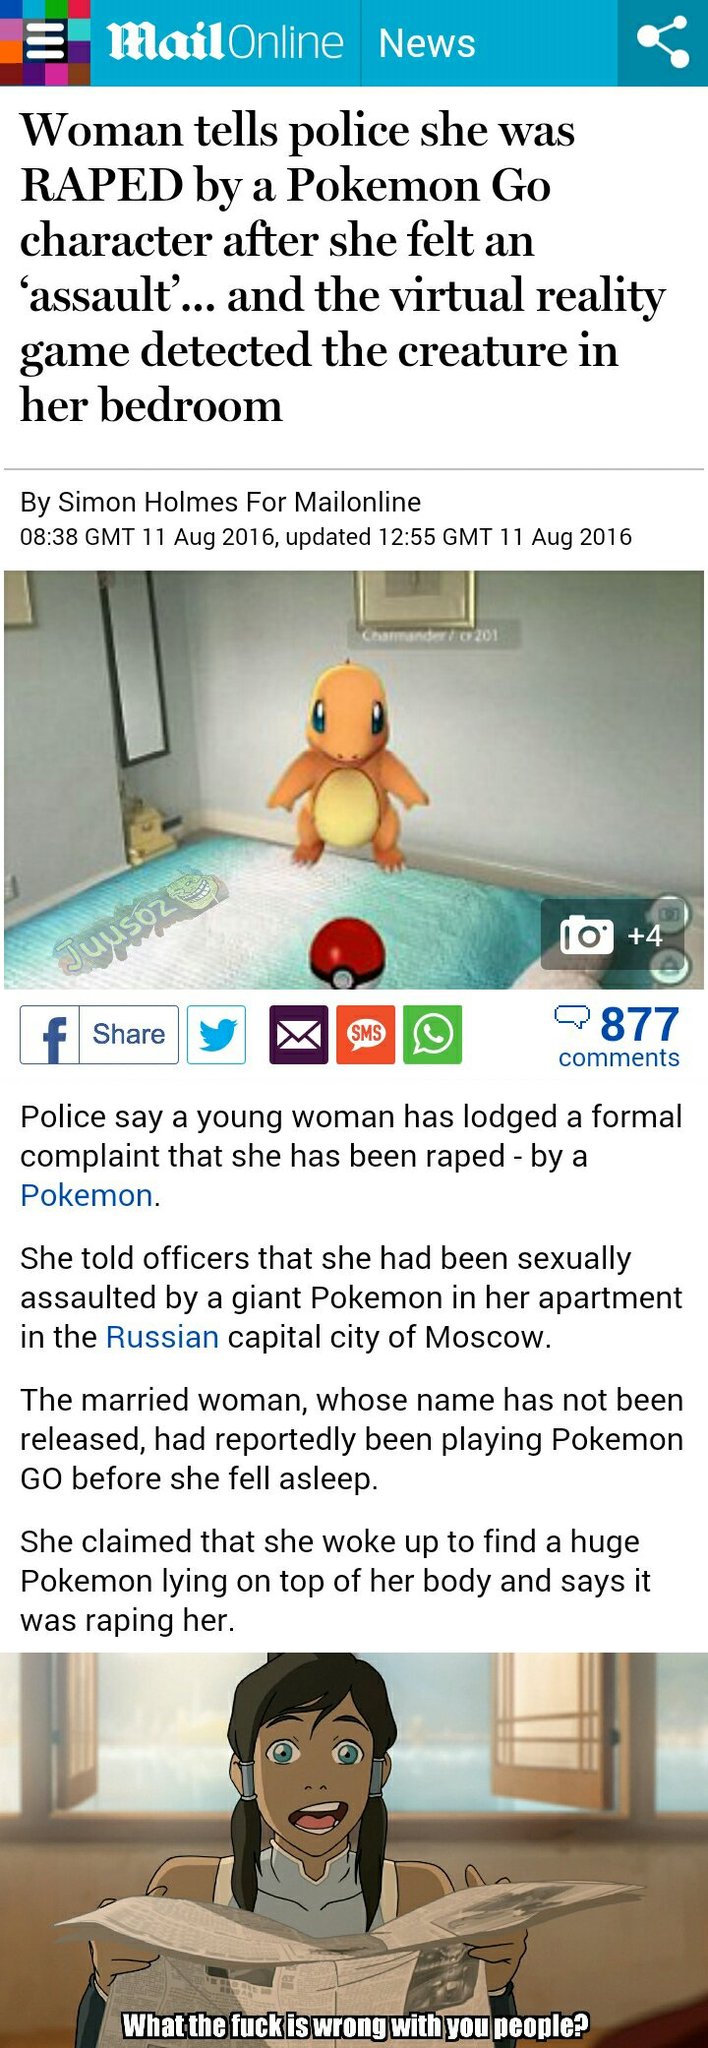 How long do you think it will take feminists to claim pokemon go is degrading women? - meme